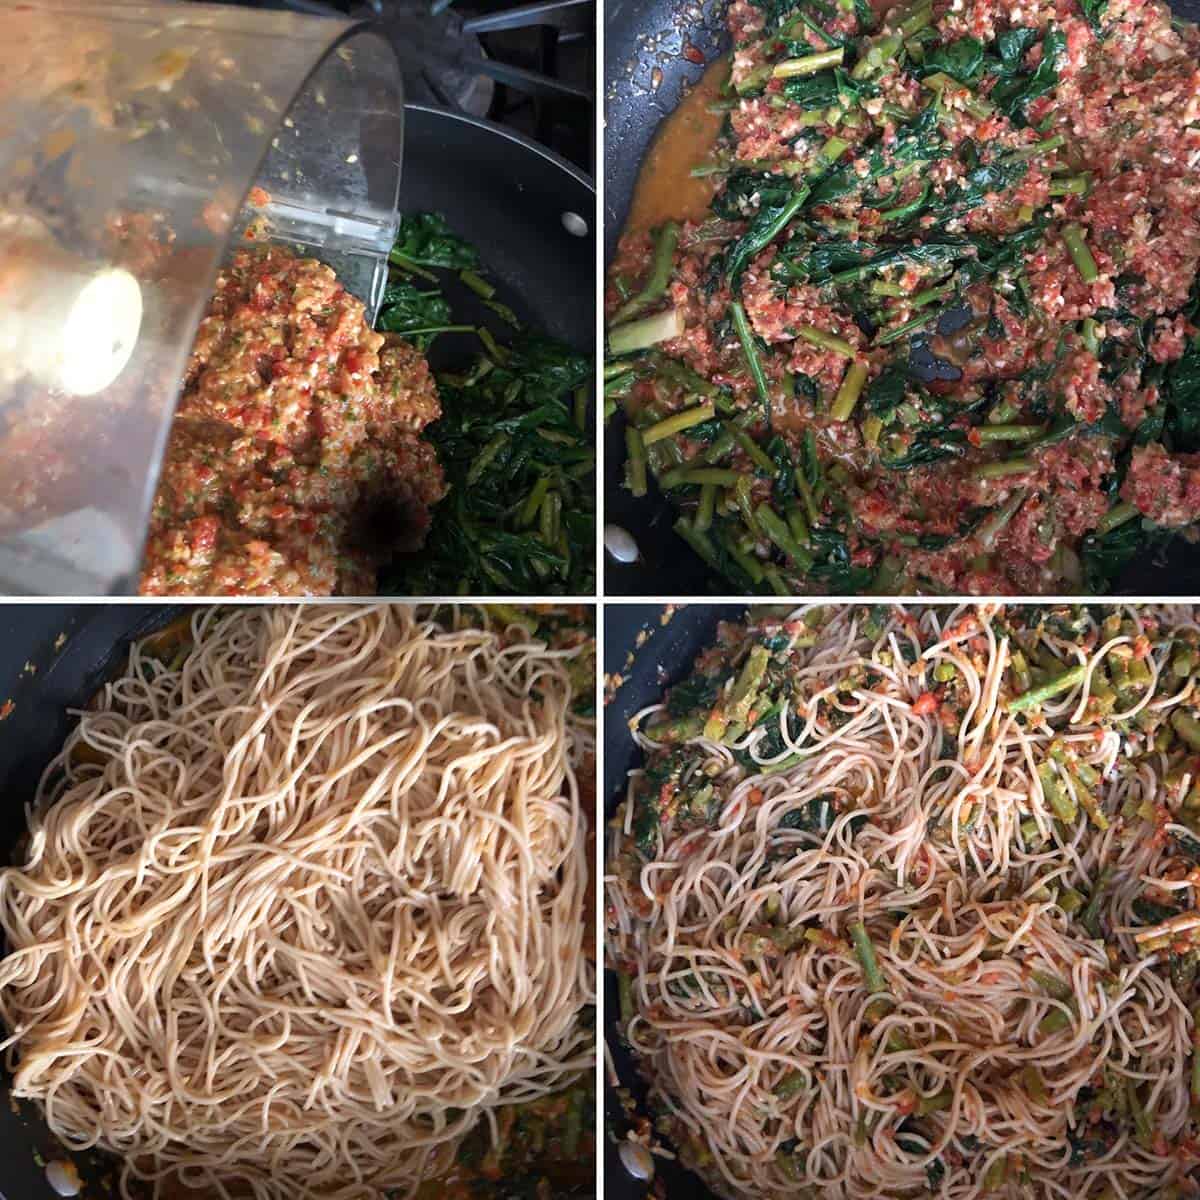 4 panel photo showing the addition of pasta sauce to veggies and pasta.